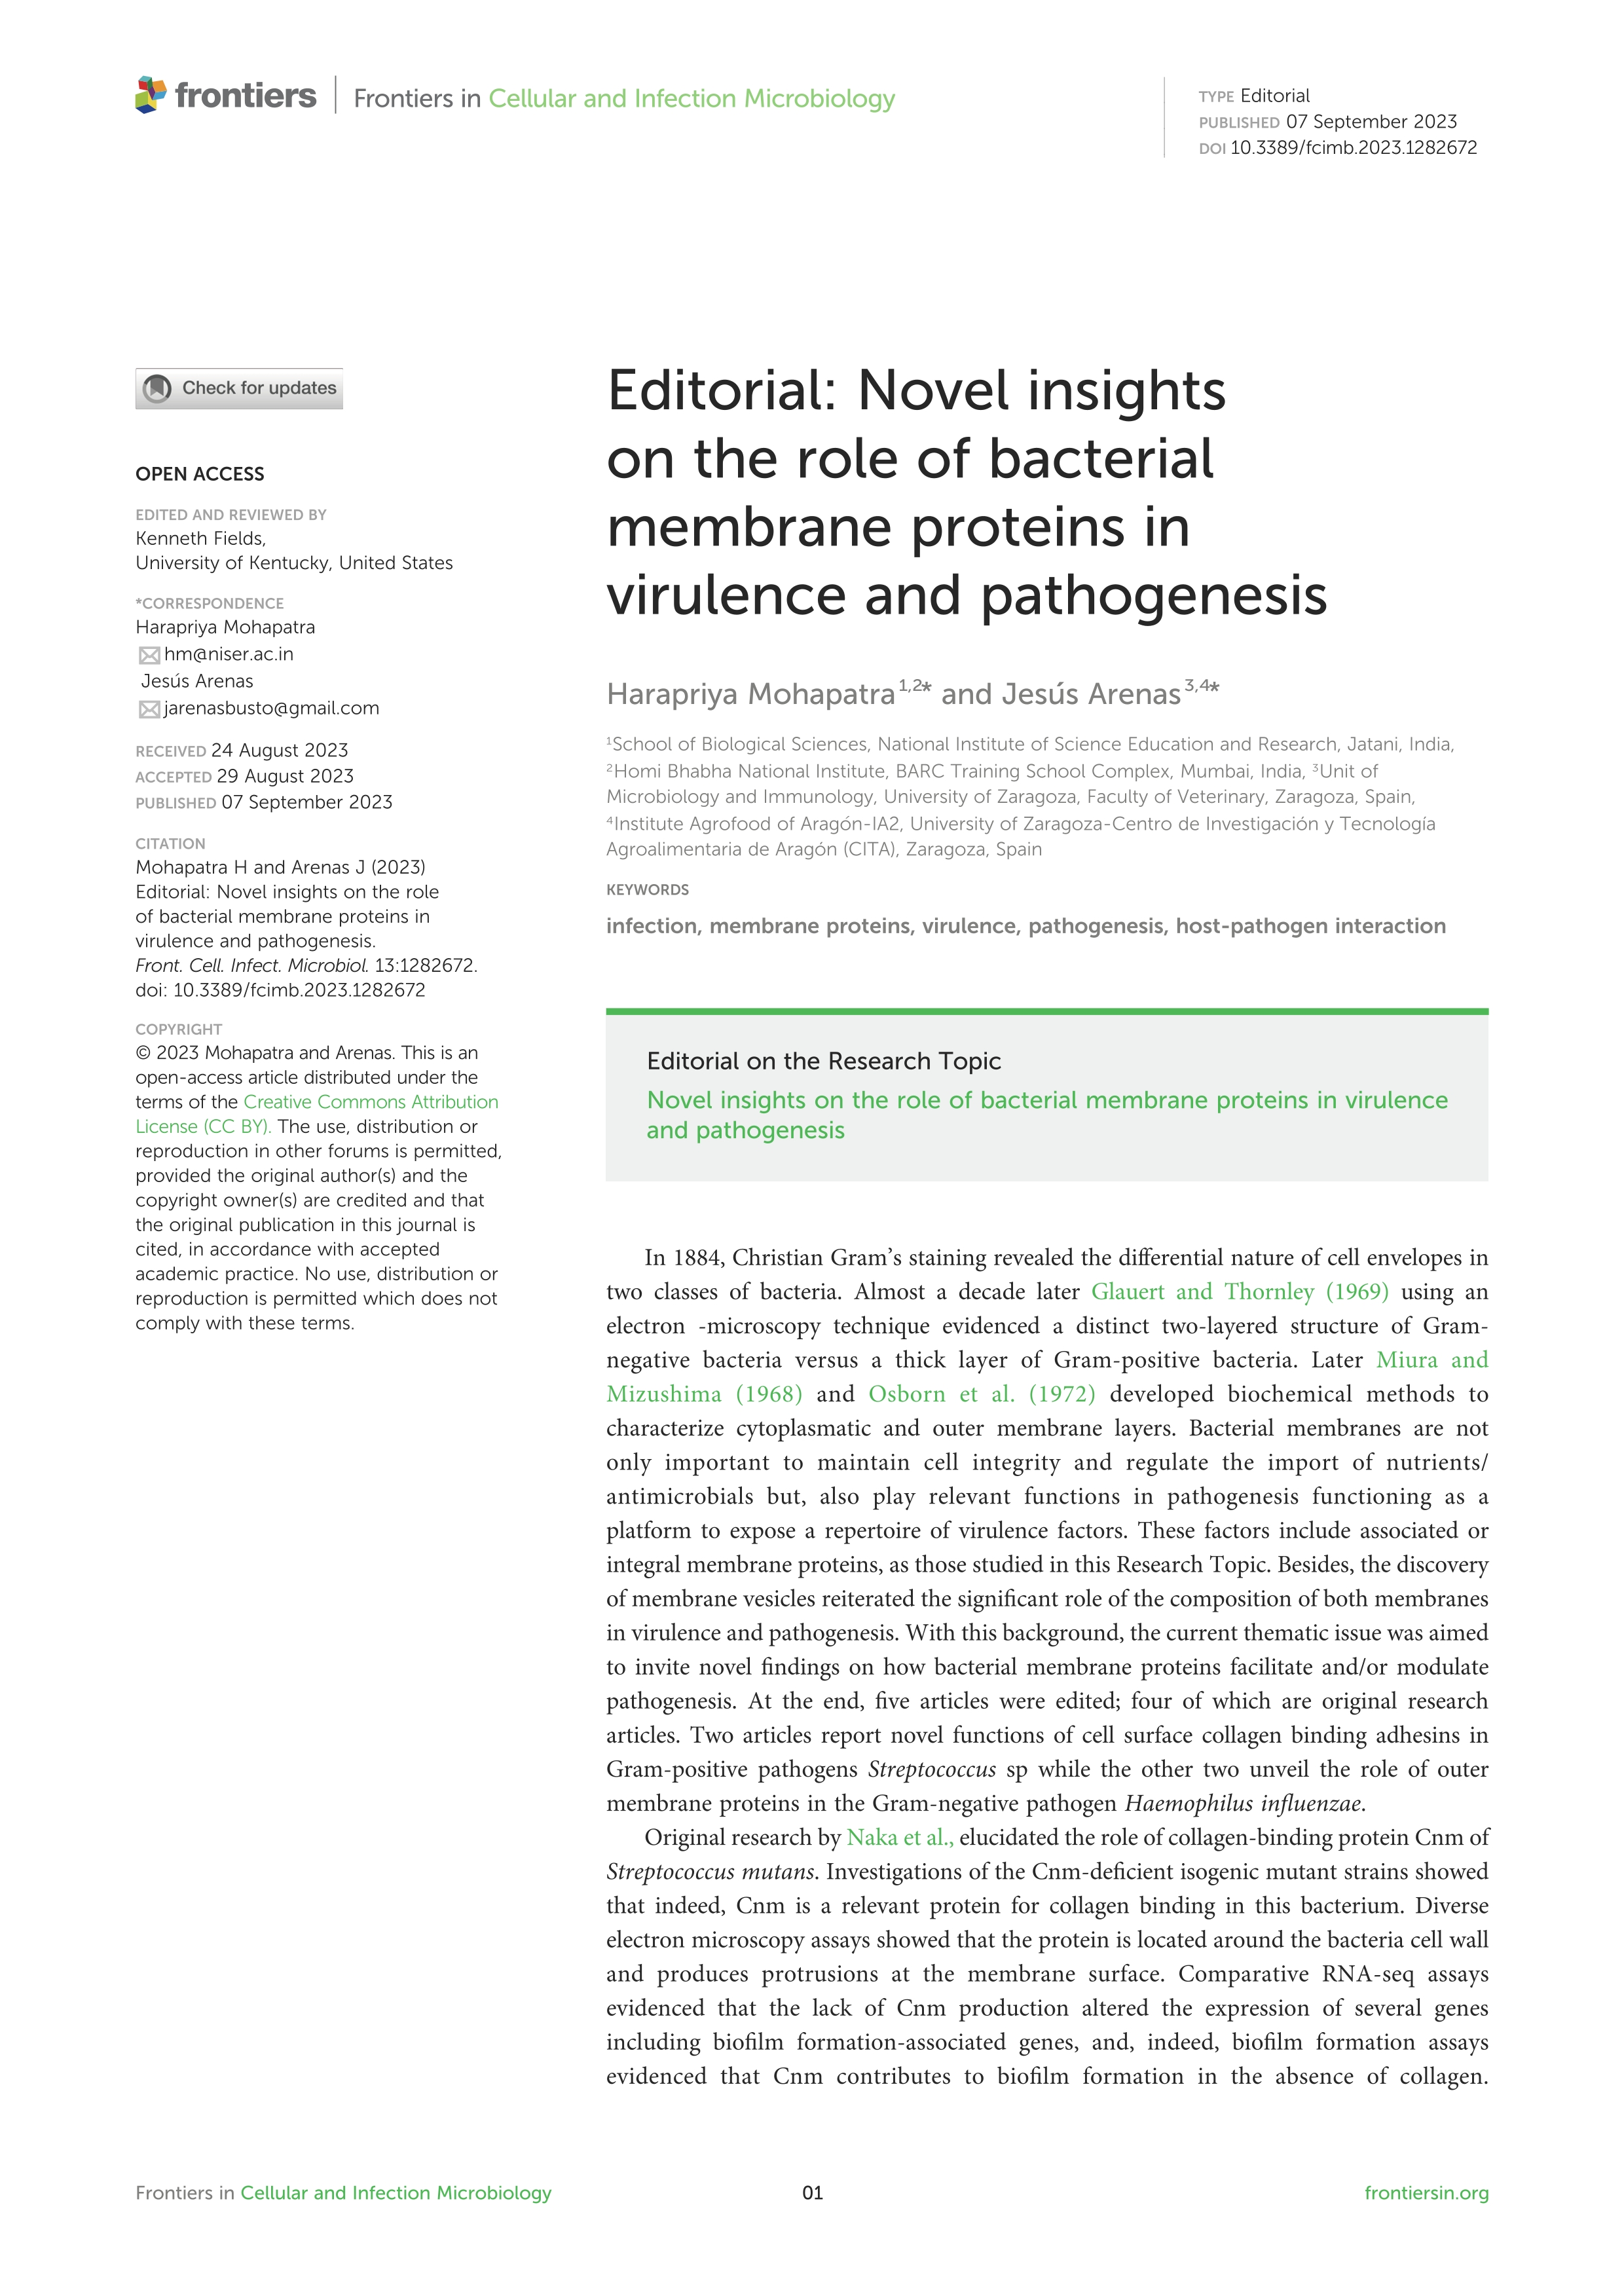 Editorial: Novel insights on the role of bacterial membrane proteins in virulence and pathogenesis